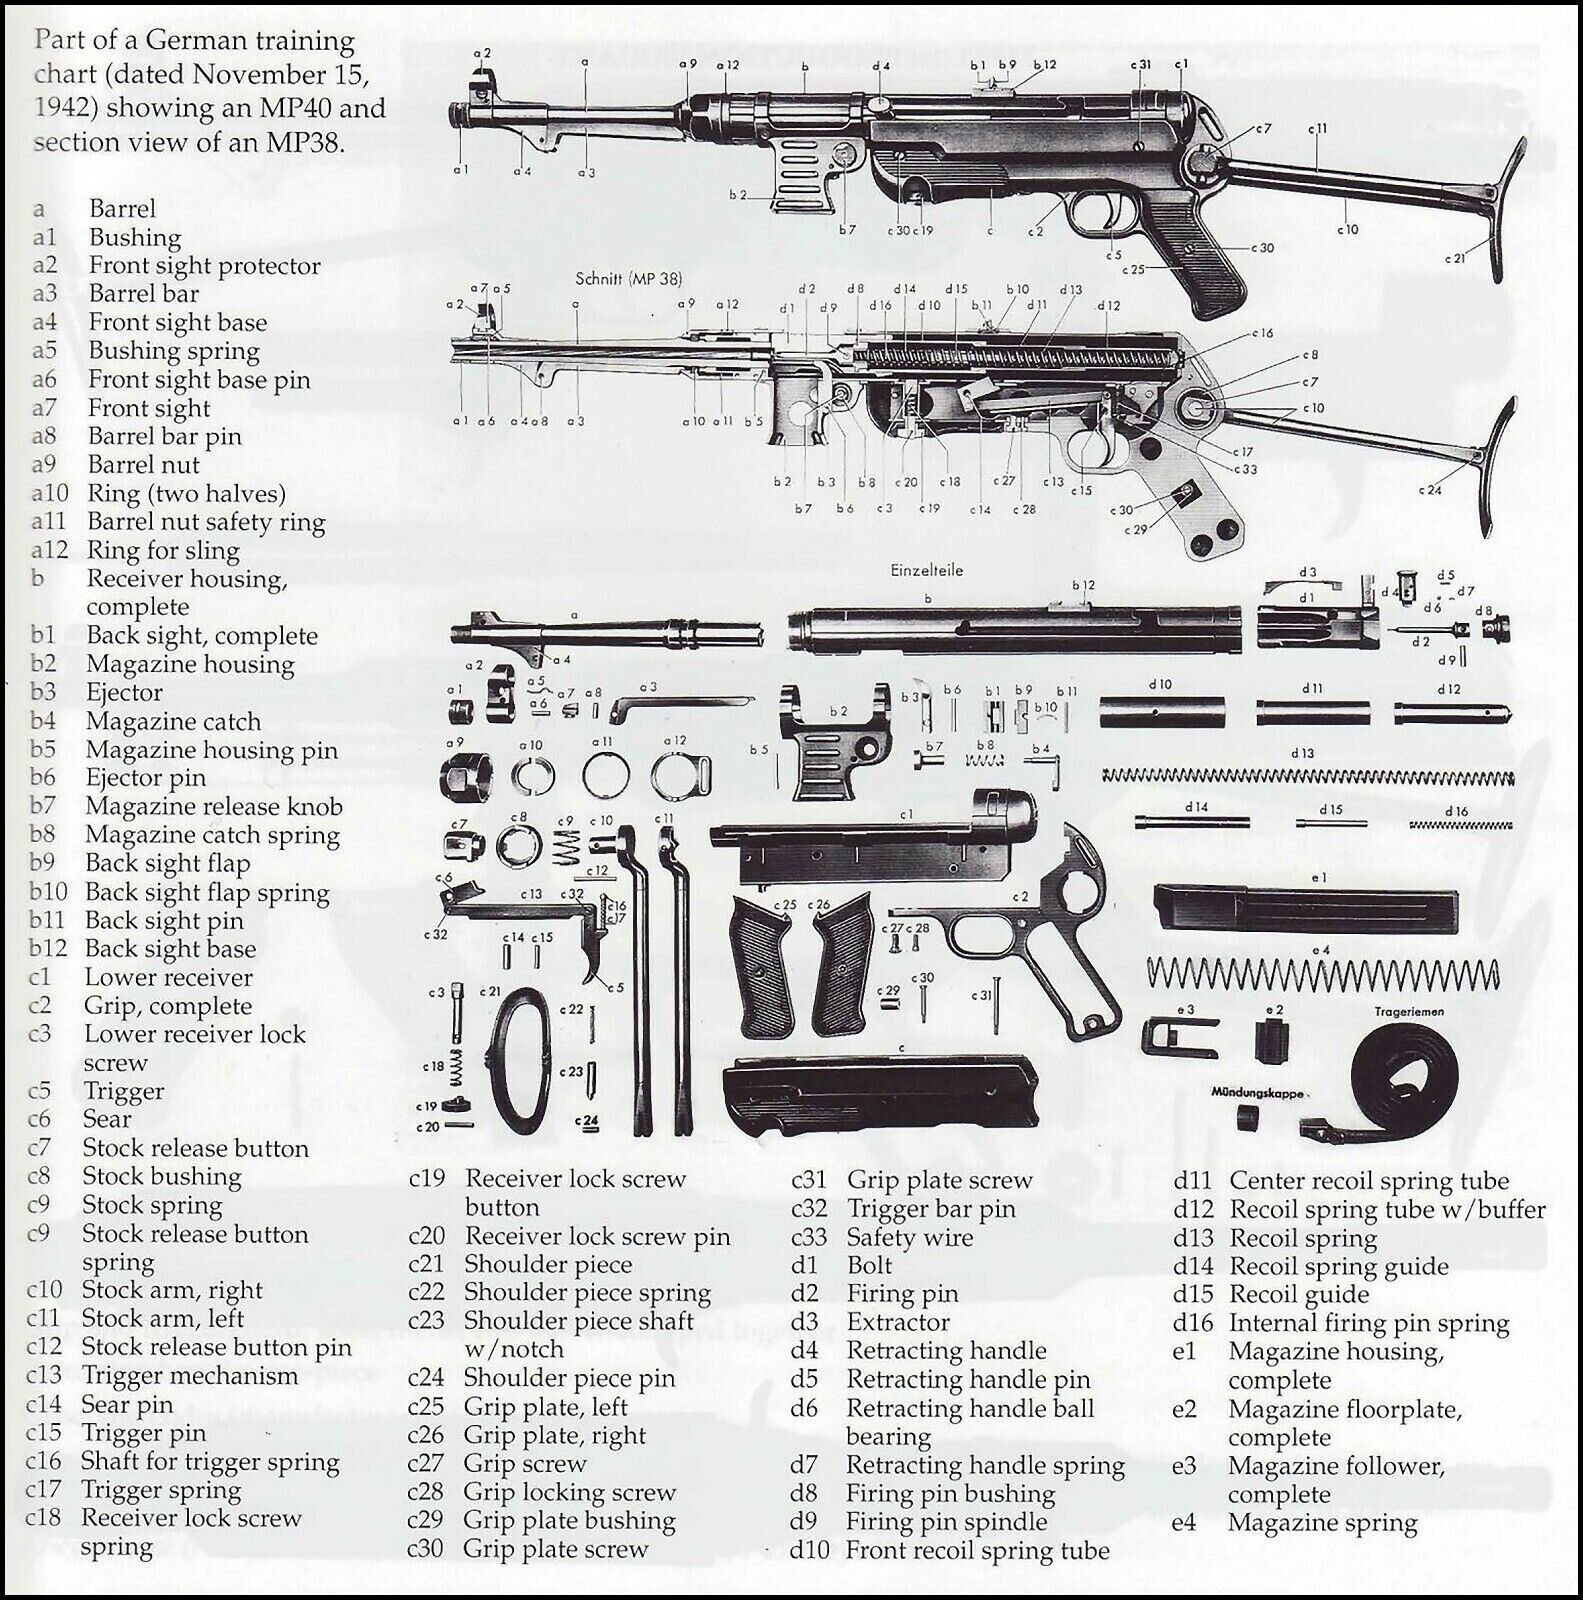 WW2 German German MP-40/38 Parts Chart Picture